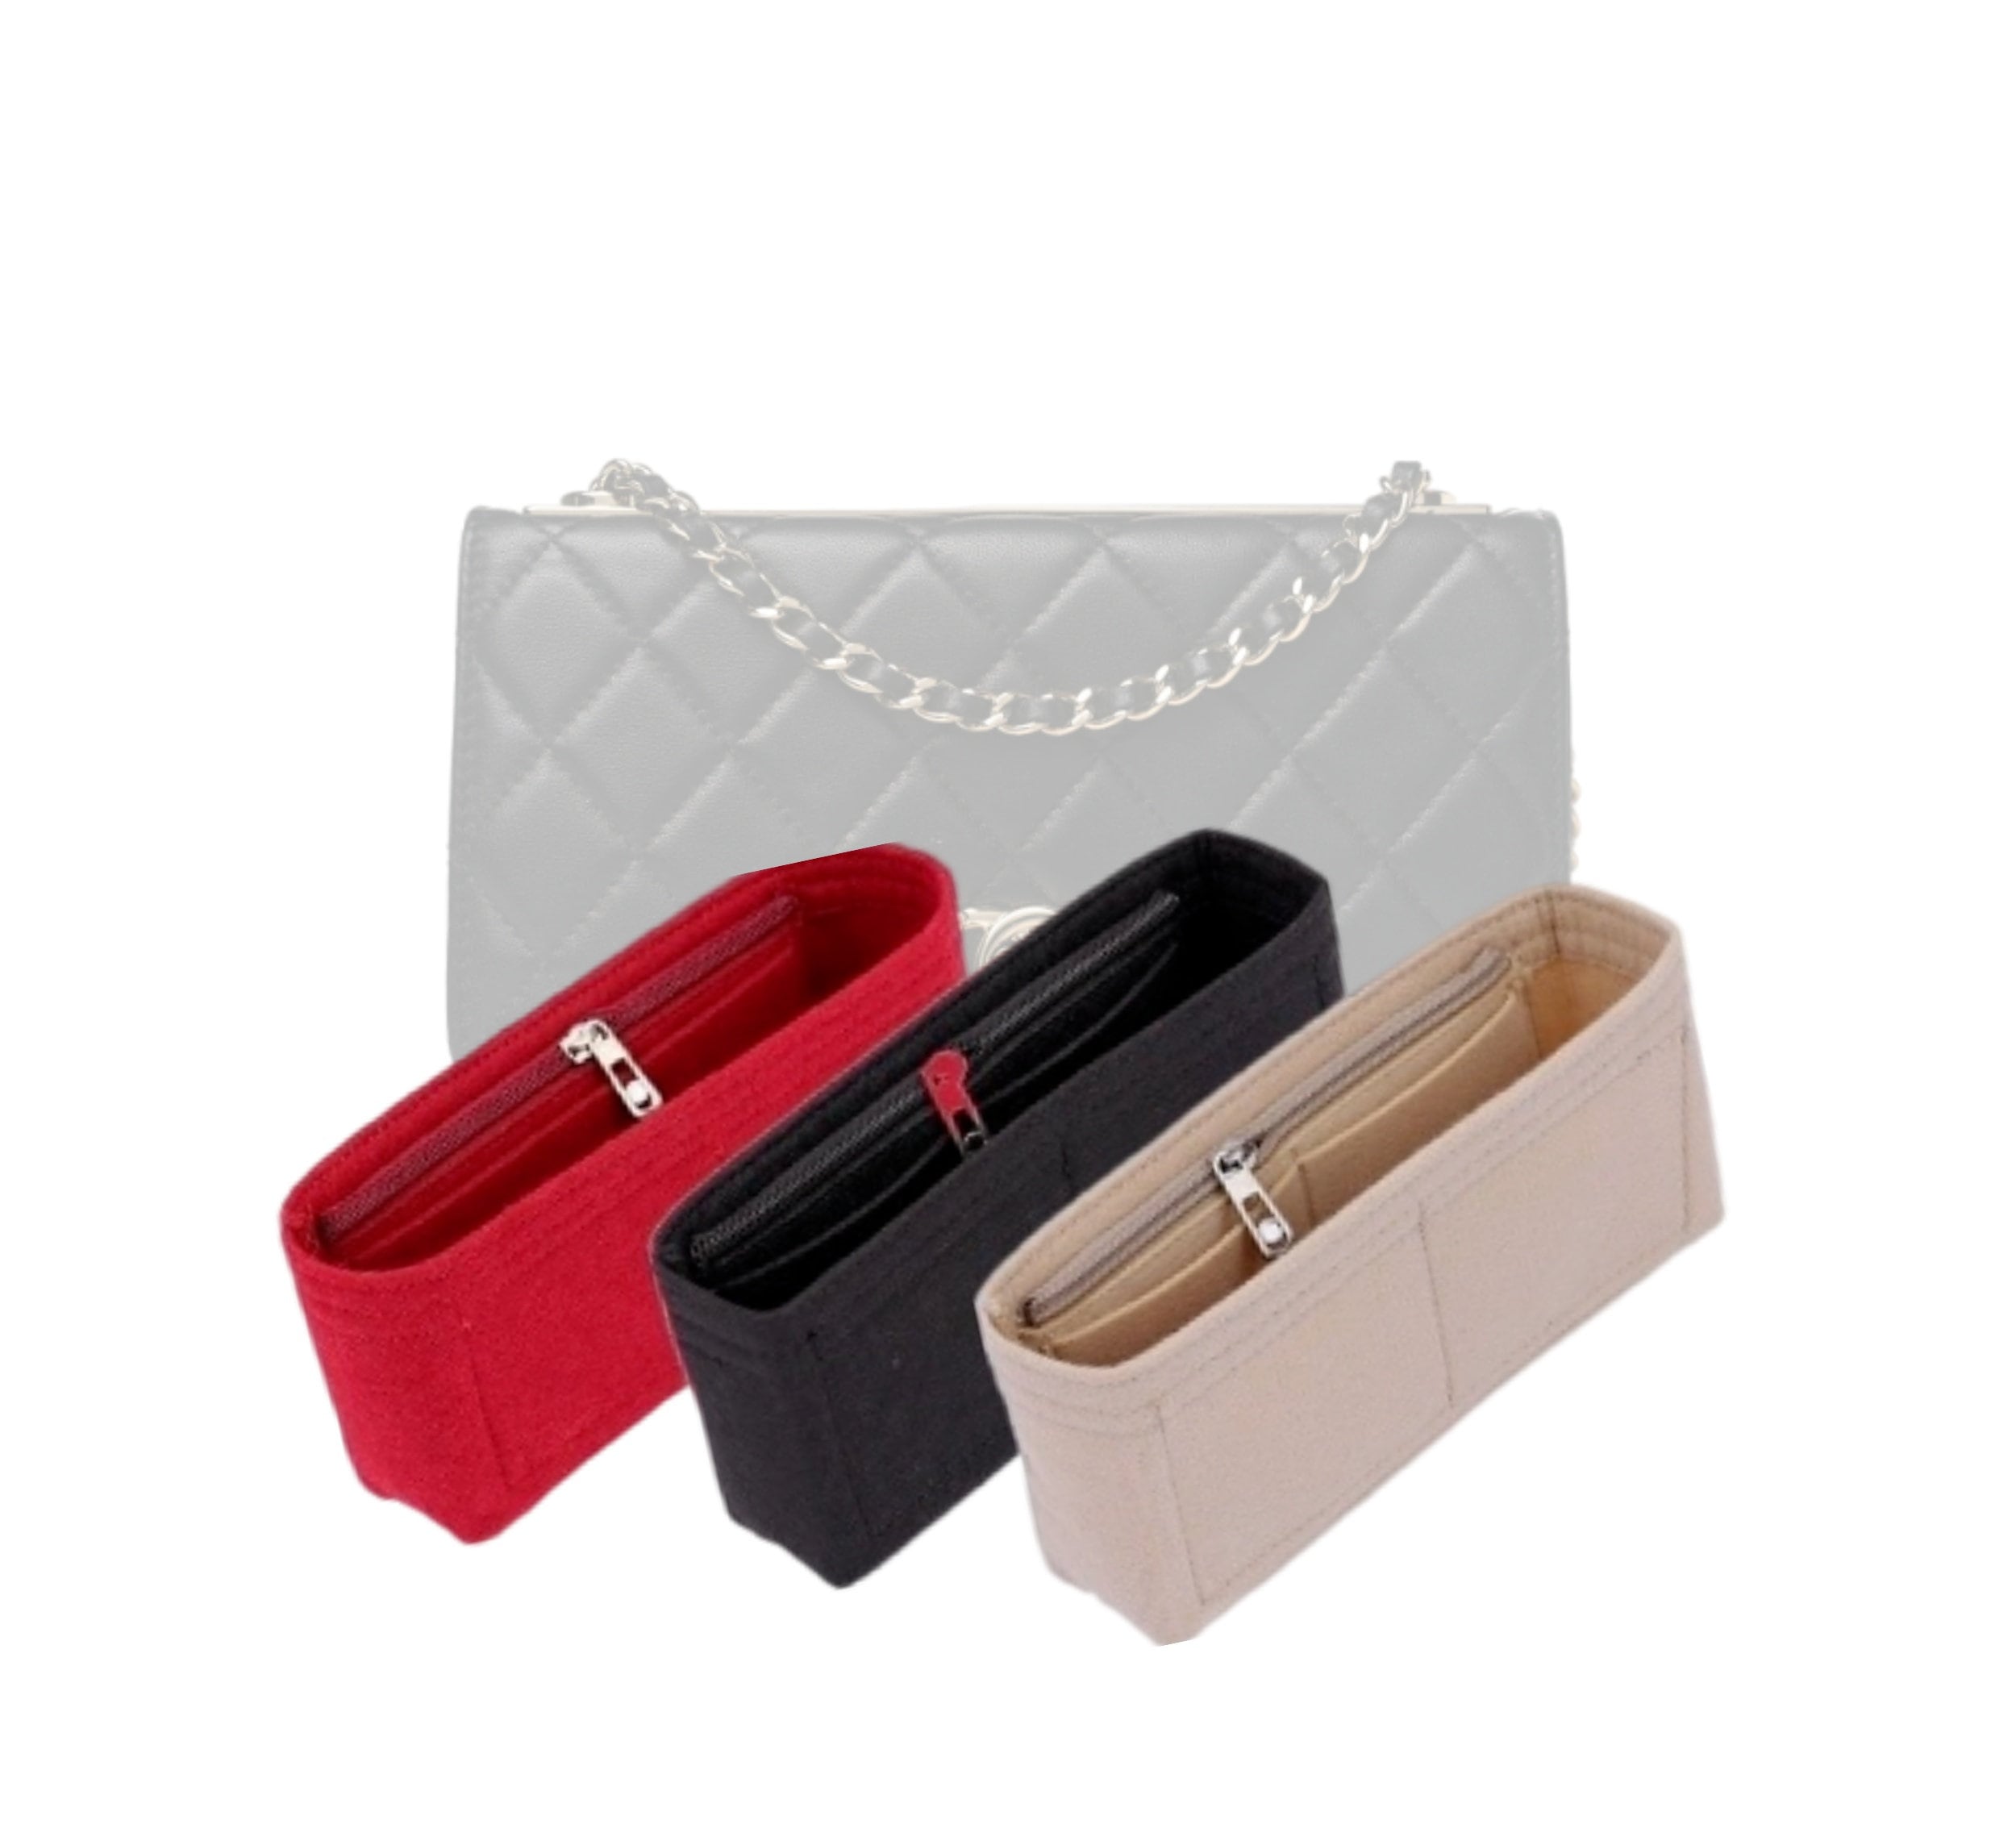 Purse Insert For Chanel Classic Maxi Flap Bag (Style A58601)